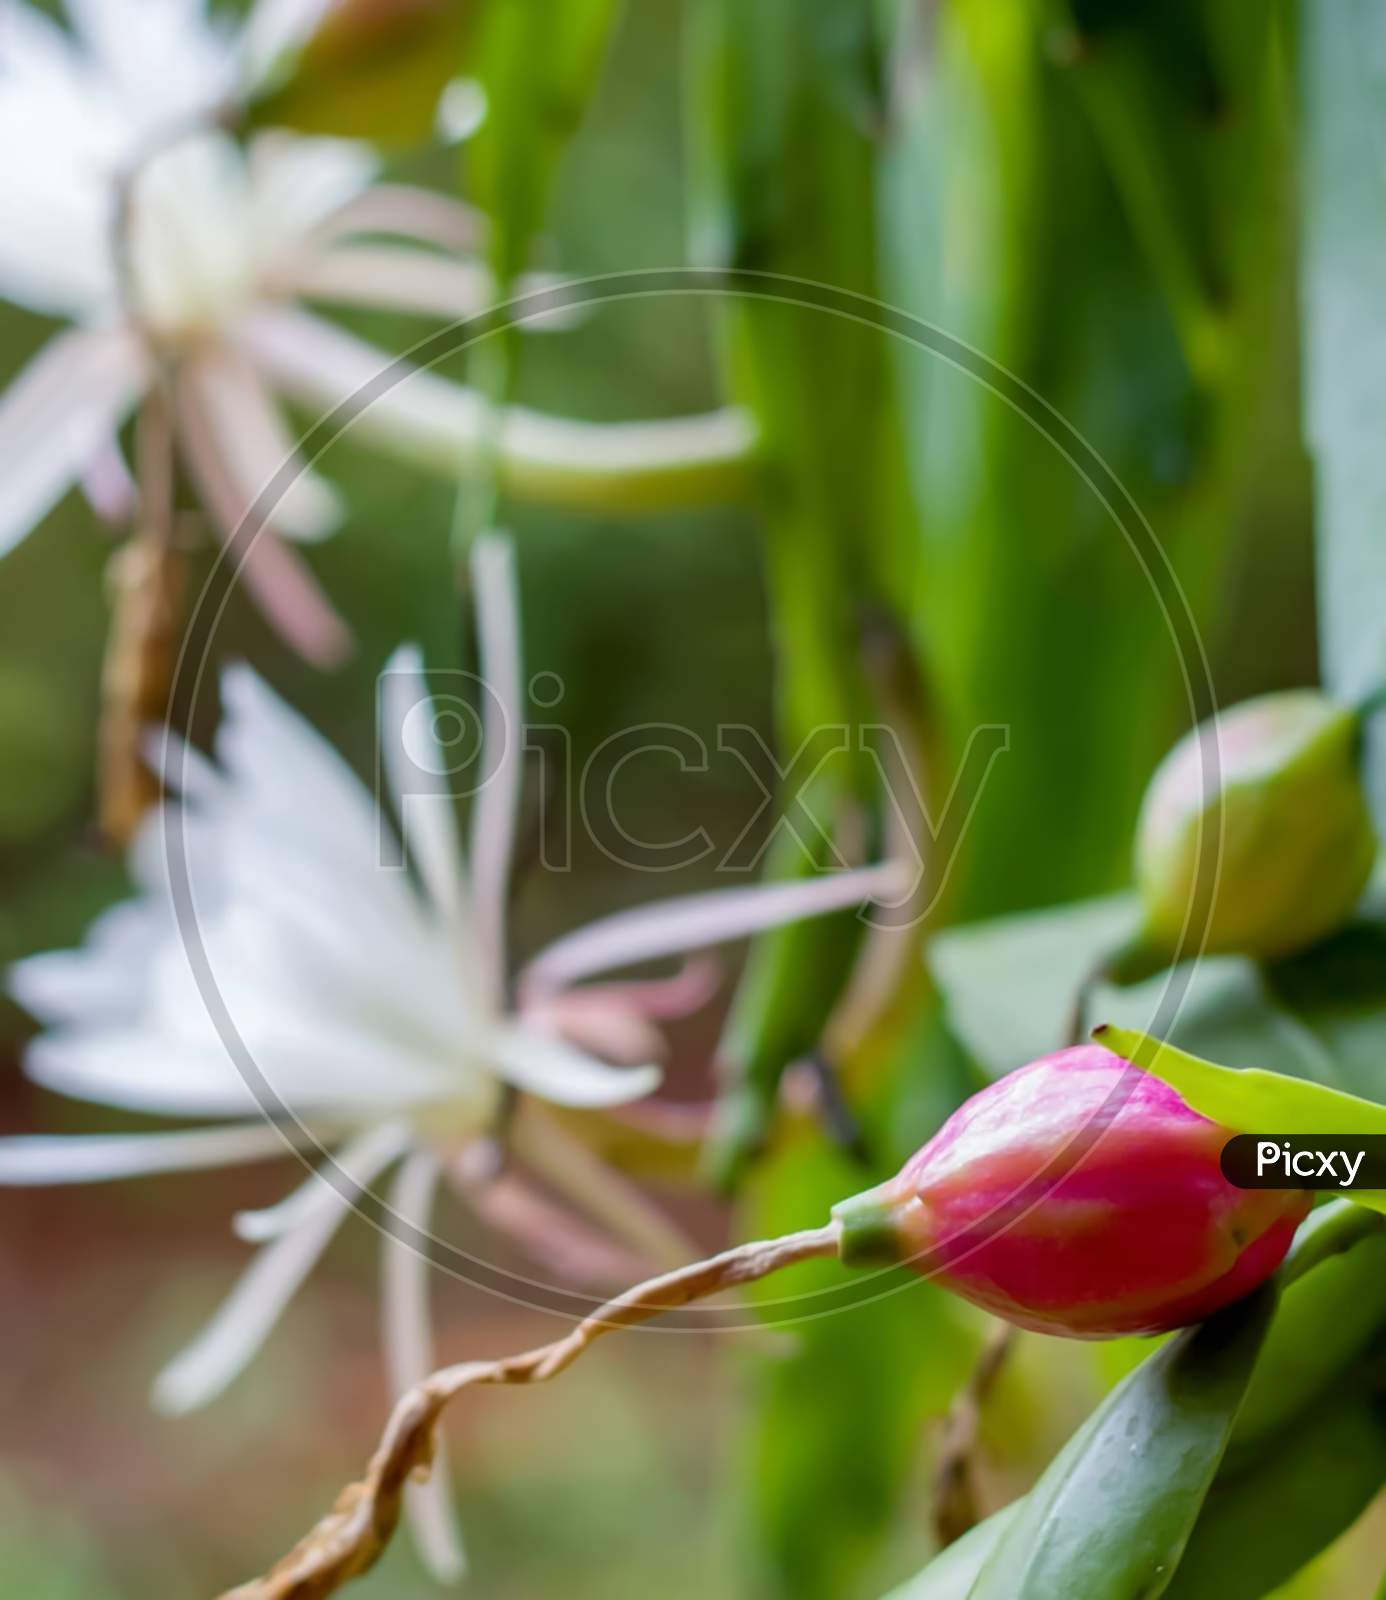 Epiphyllum (Wijaya Kusuma Cactus Fruits) Is A Genus Of 19 Species Of Epiphytic Plants In The Cactus Family (Cactaceae), Native To Central America. Common Names For These Species Include Orchid Cacti